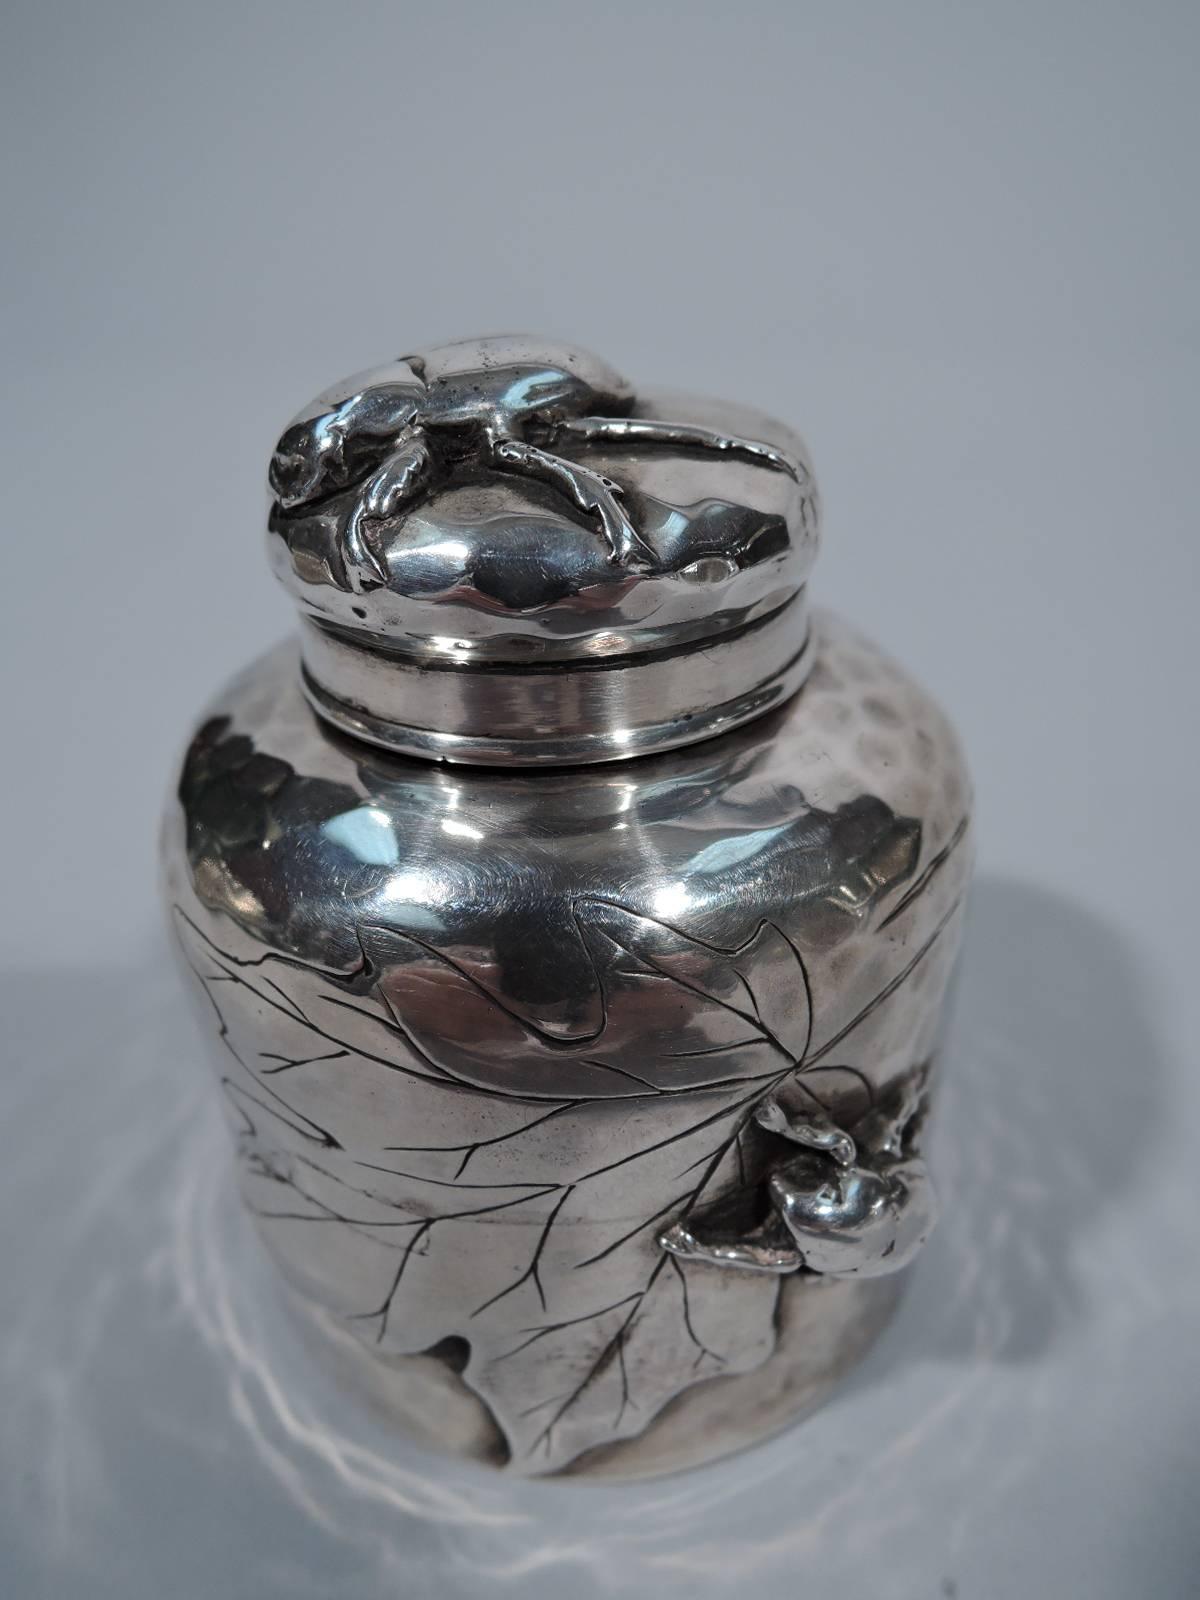 Hand-hammered and applied sterling silver inkwell. Made by Tiffany & Co. in New York, circa 1880.

Straight sides, curved shoulders, and threaded bun cover. A conventional form embellished with insects and leaves applied to honeycomb ground.